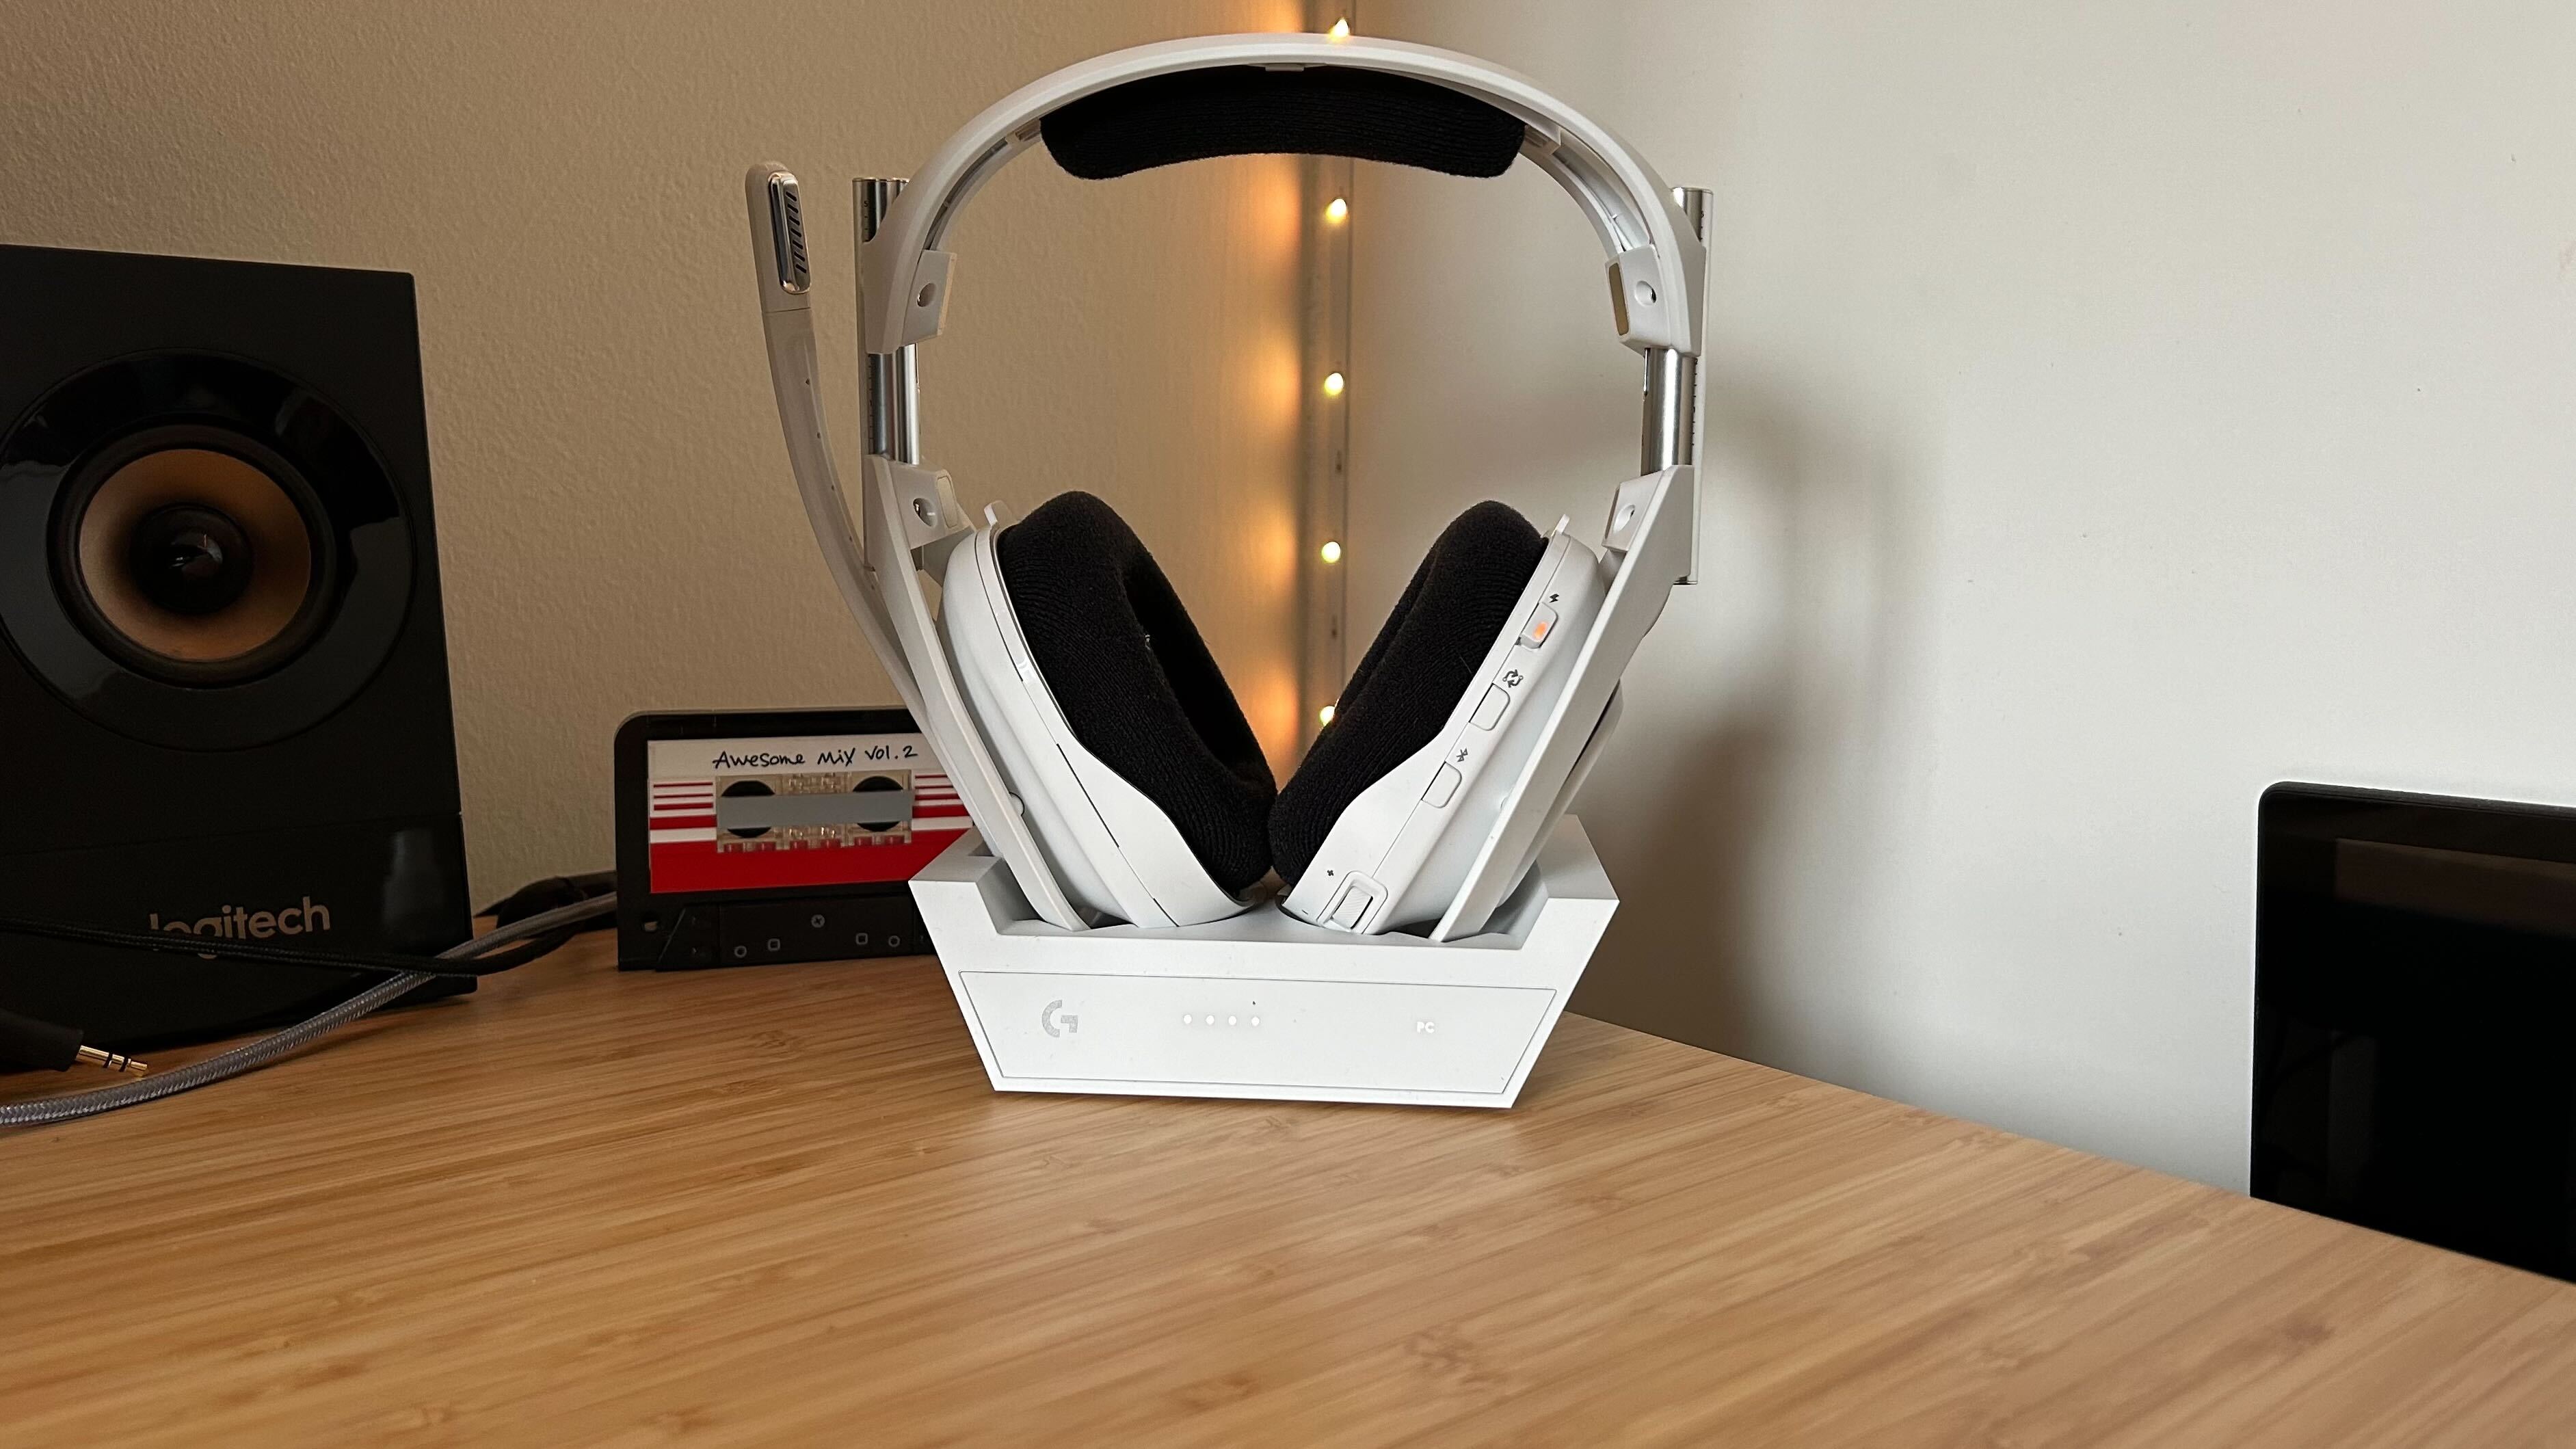 Astro A50 X review: console hoppers are living the dream